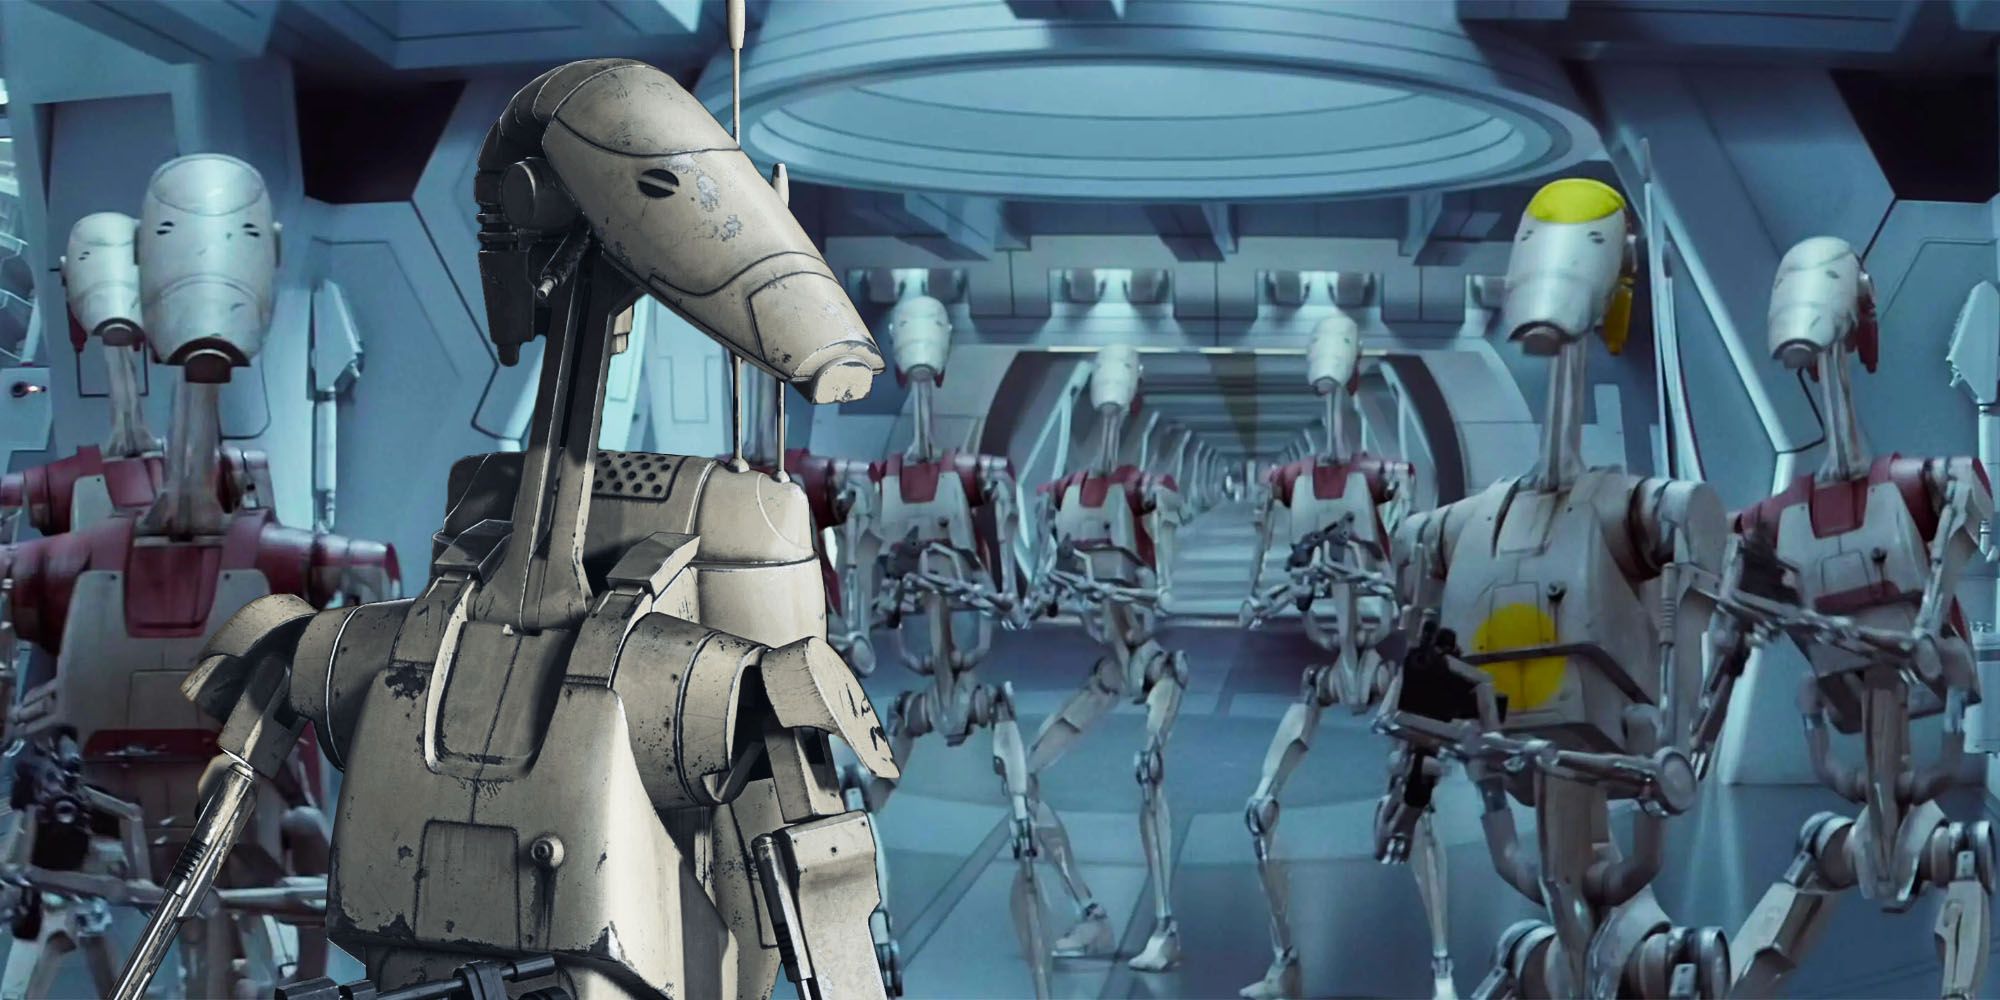 How Star wars prequels explained the droids being comic relief and dumb